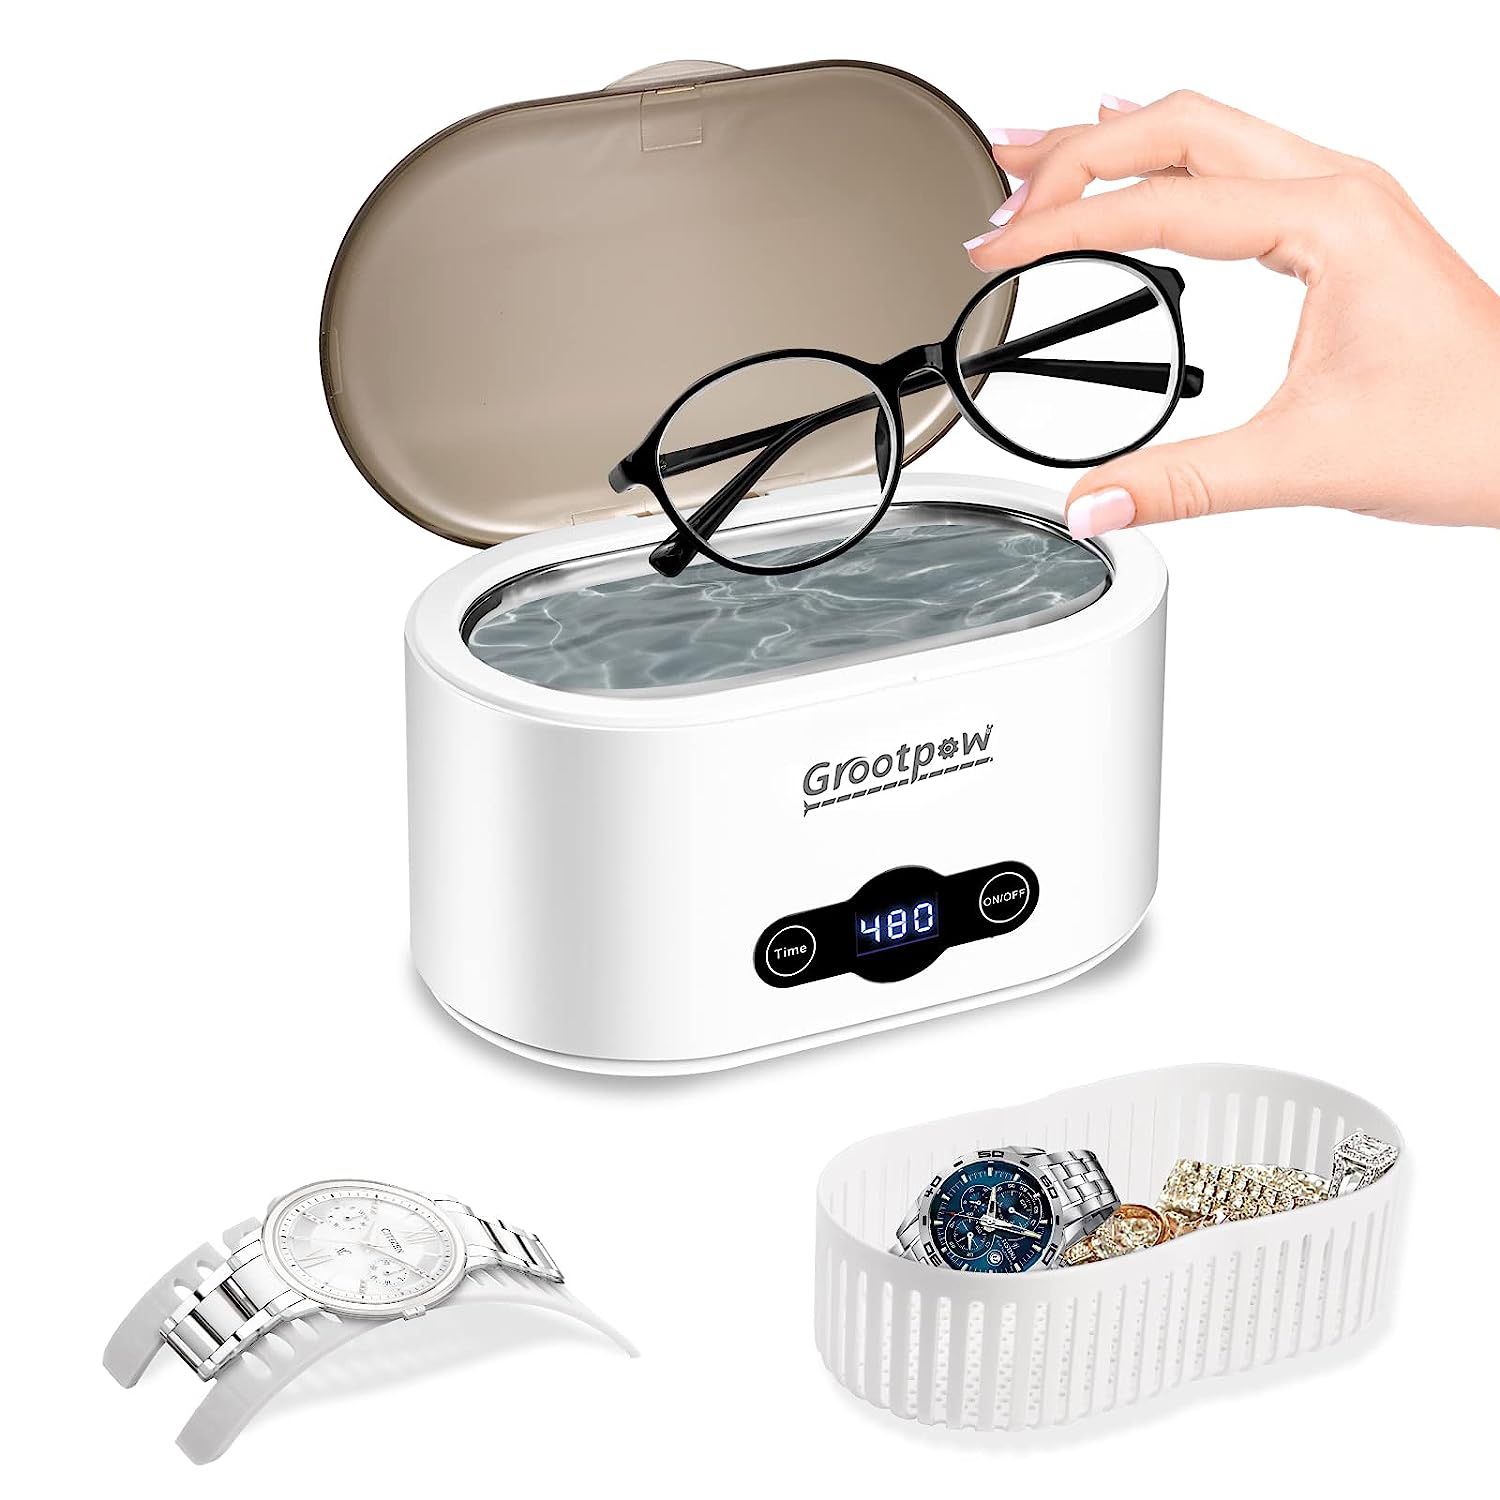 18 Oz Ultrasonic Jewelry Cleaner, Ultrasonic Cleaner with 5 Digital Timer, SUS 304 Tank, Watch Holder, 45kHz Jewelry Cleaner Ultrasonic Machine for Ey